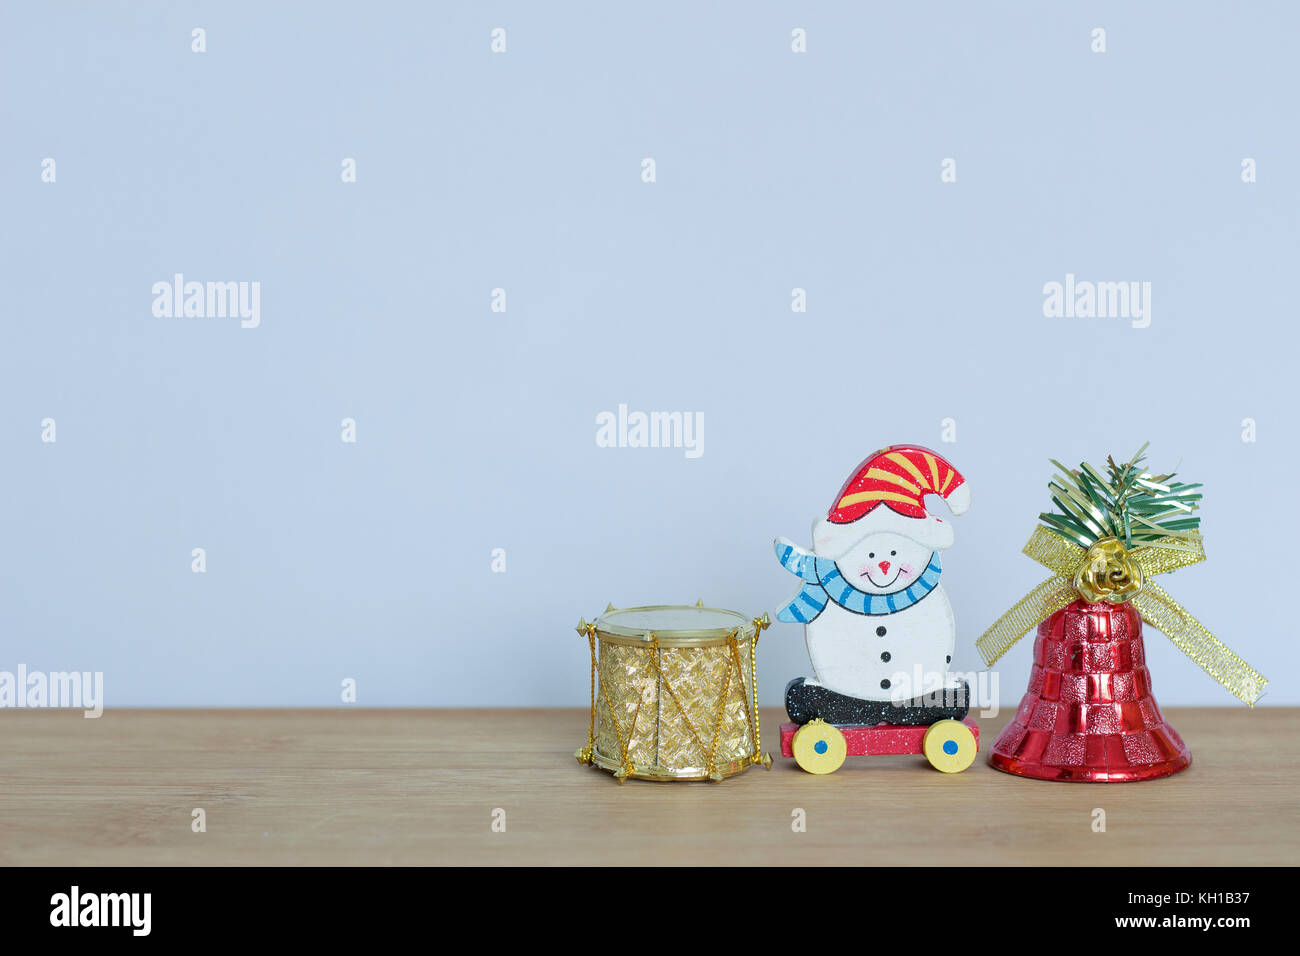 little christmas themed toy with snowman, teddy bear, ball and red bells Stock Photo